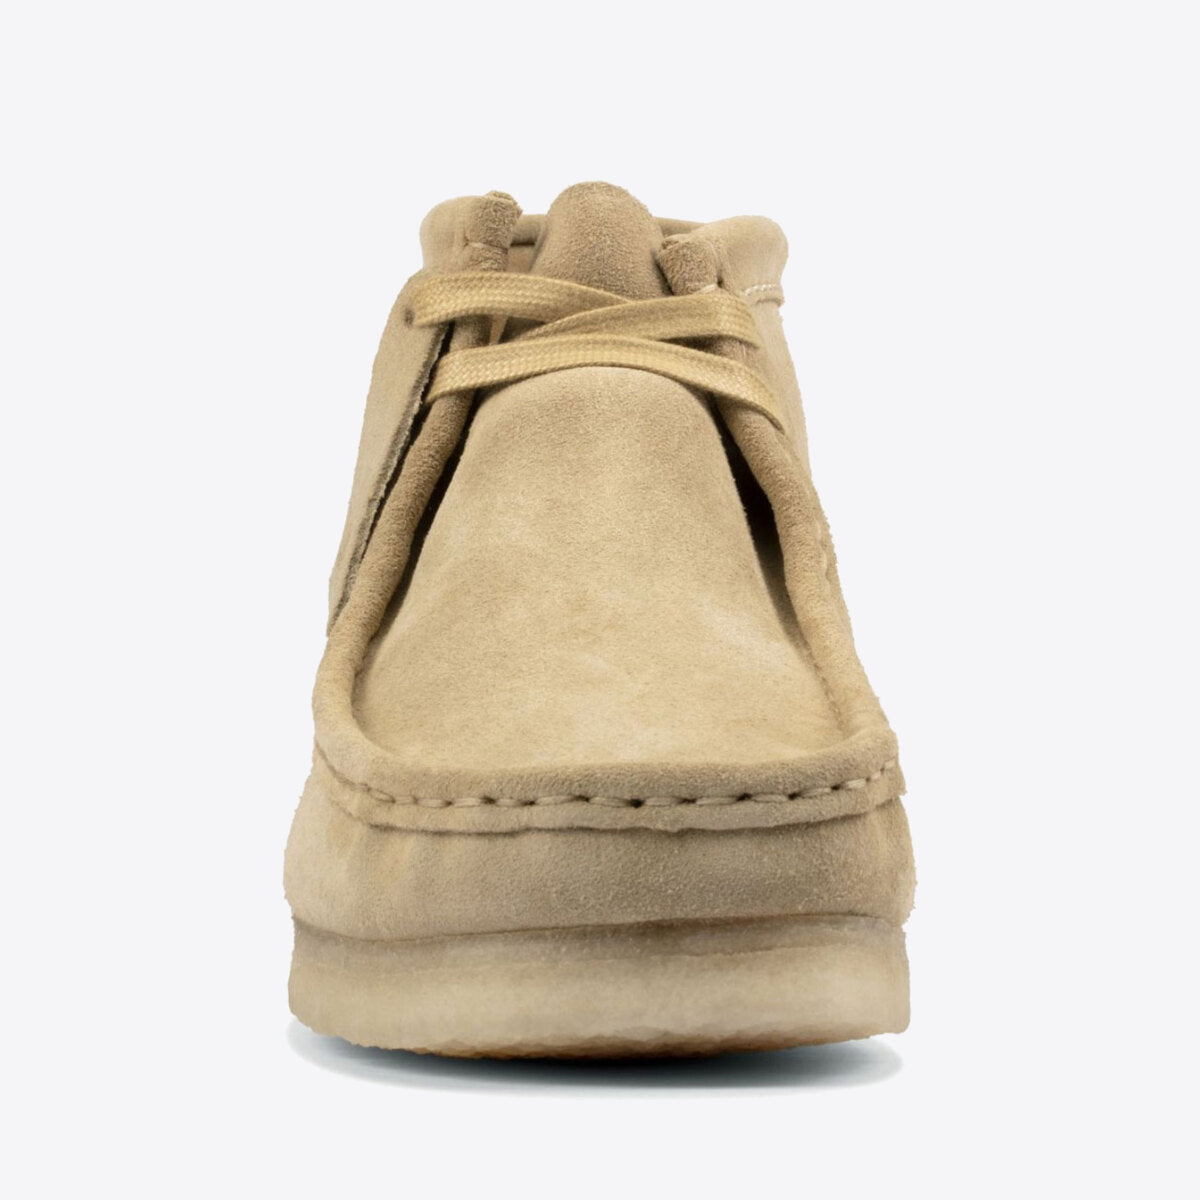 CLARKS Wallabee Boot Suede Maple - Image 3